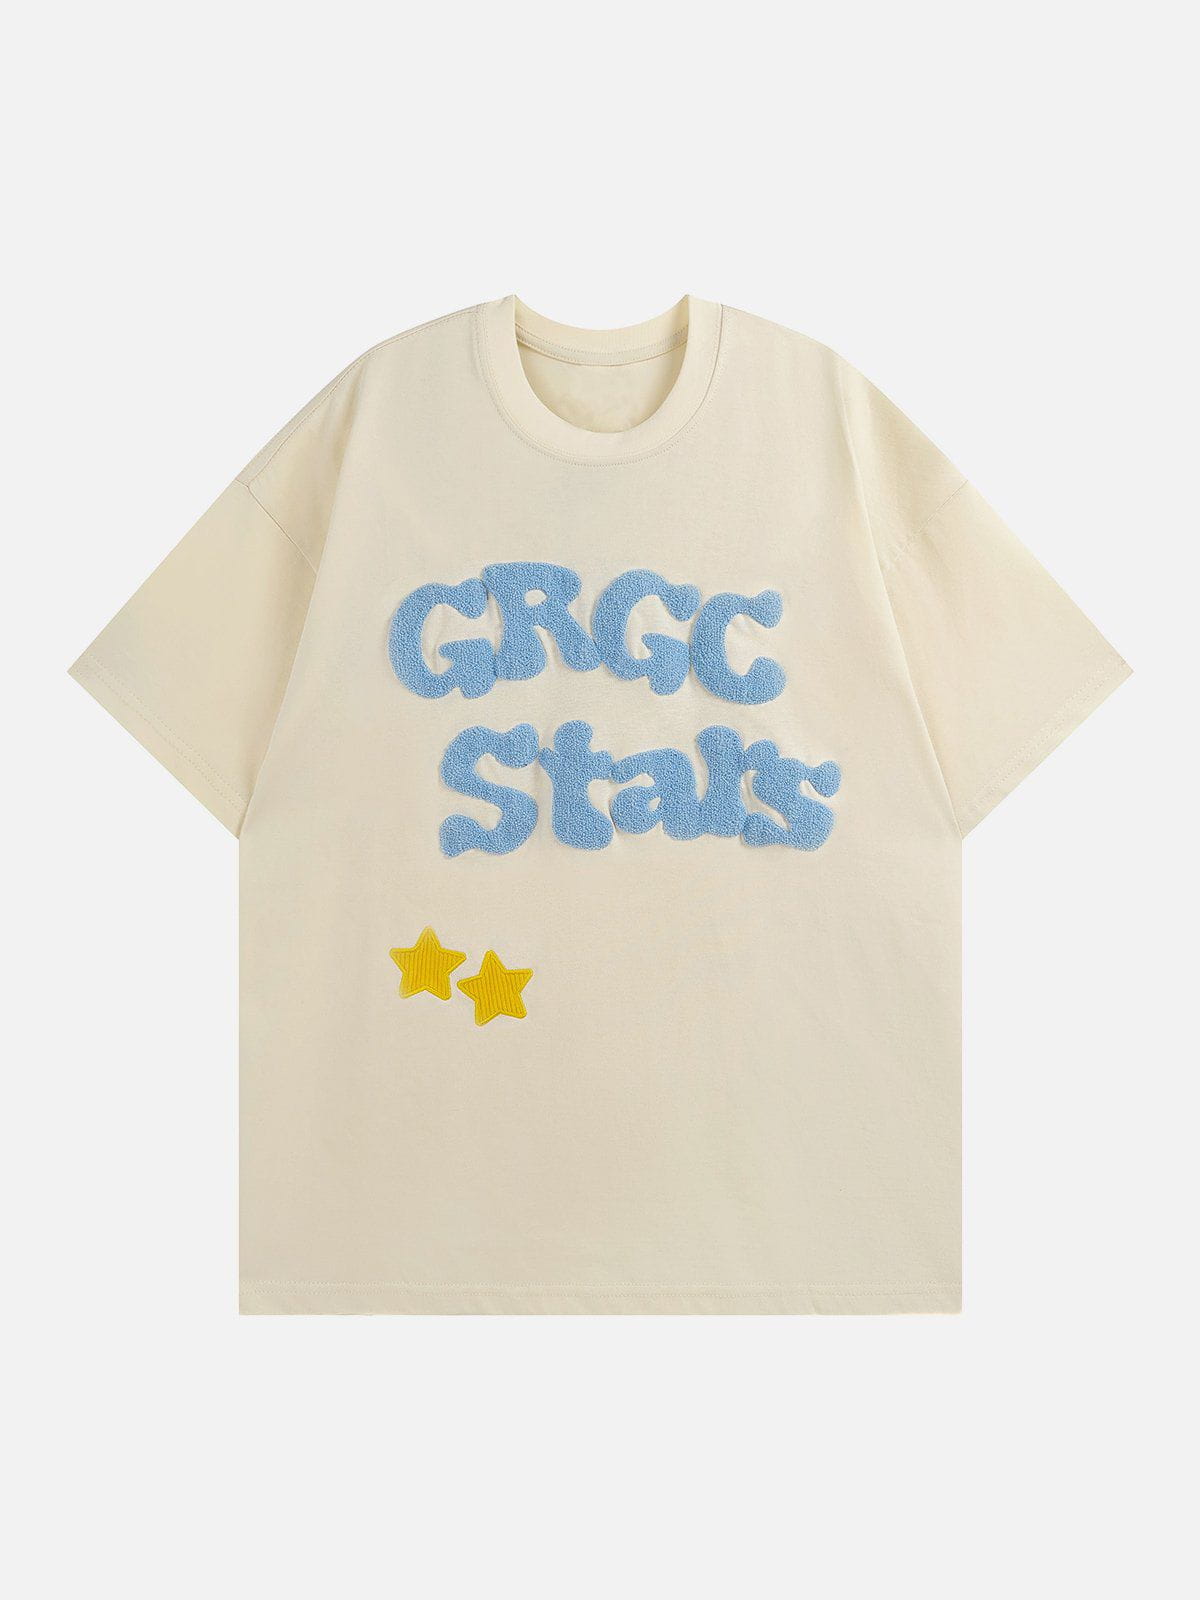 Sneakerland™ - Lettered Star Embroidery Tee